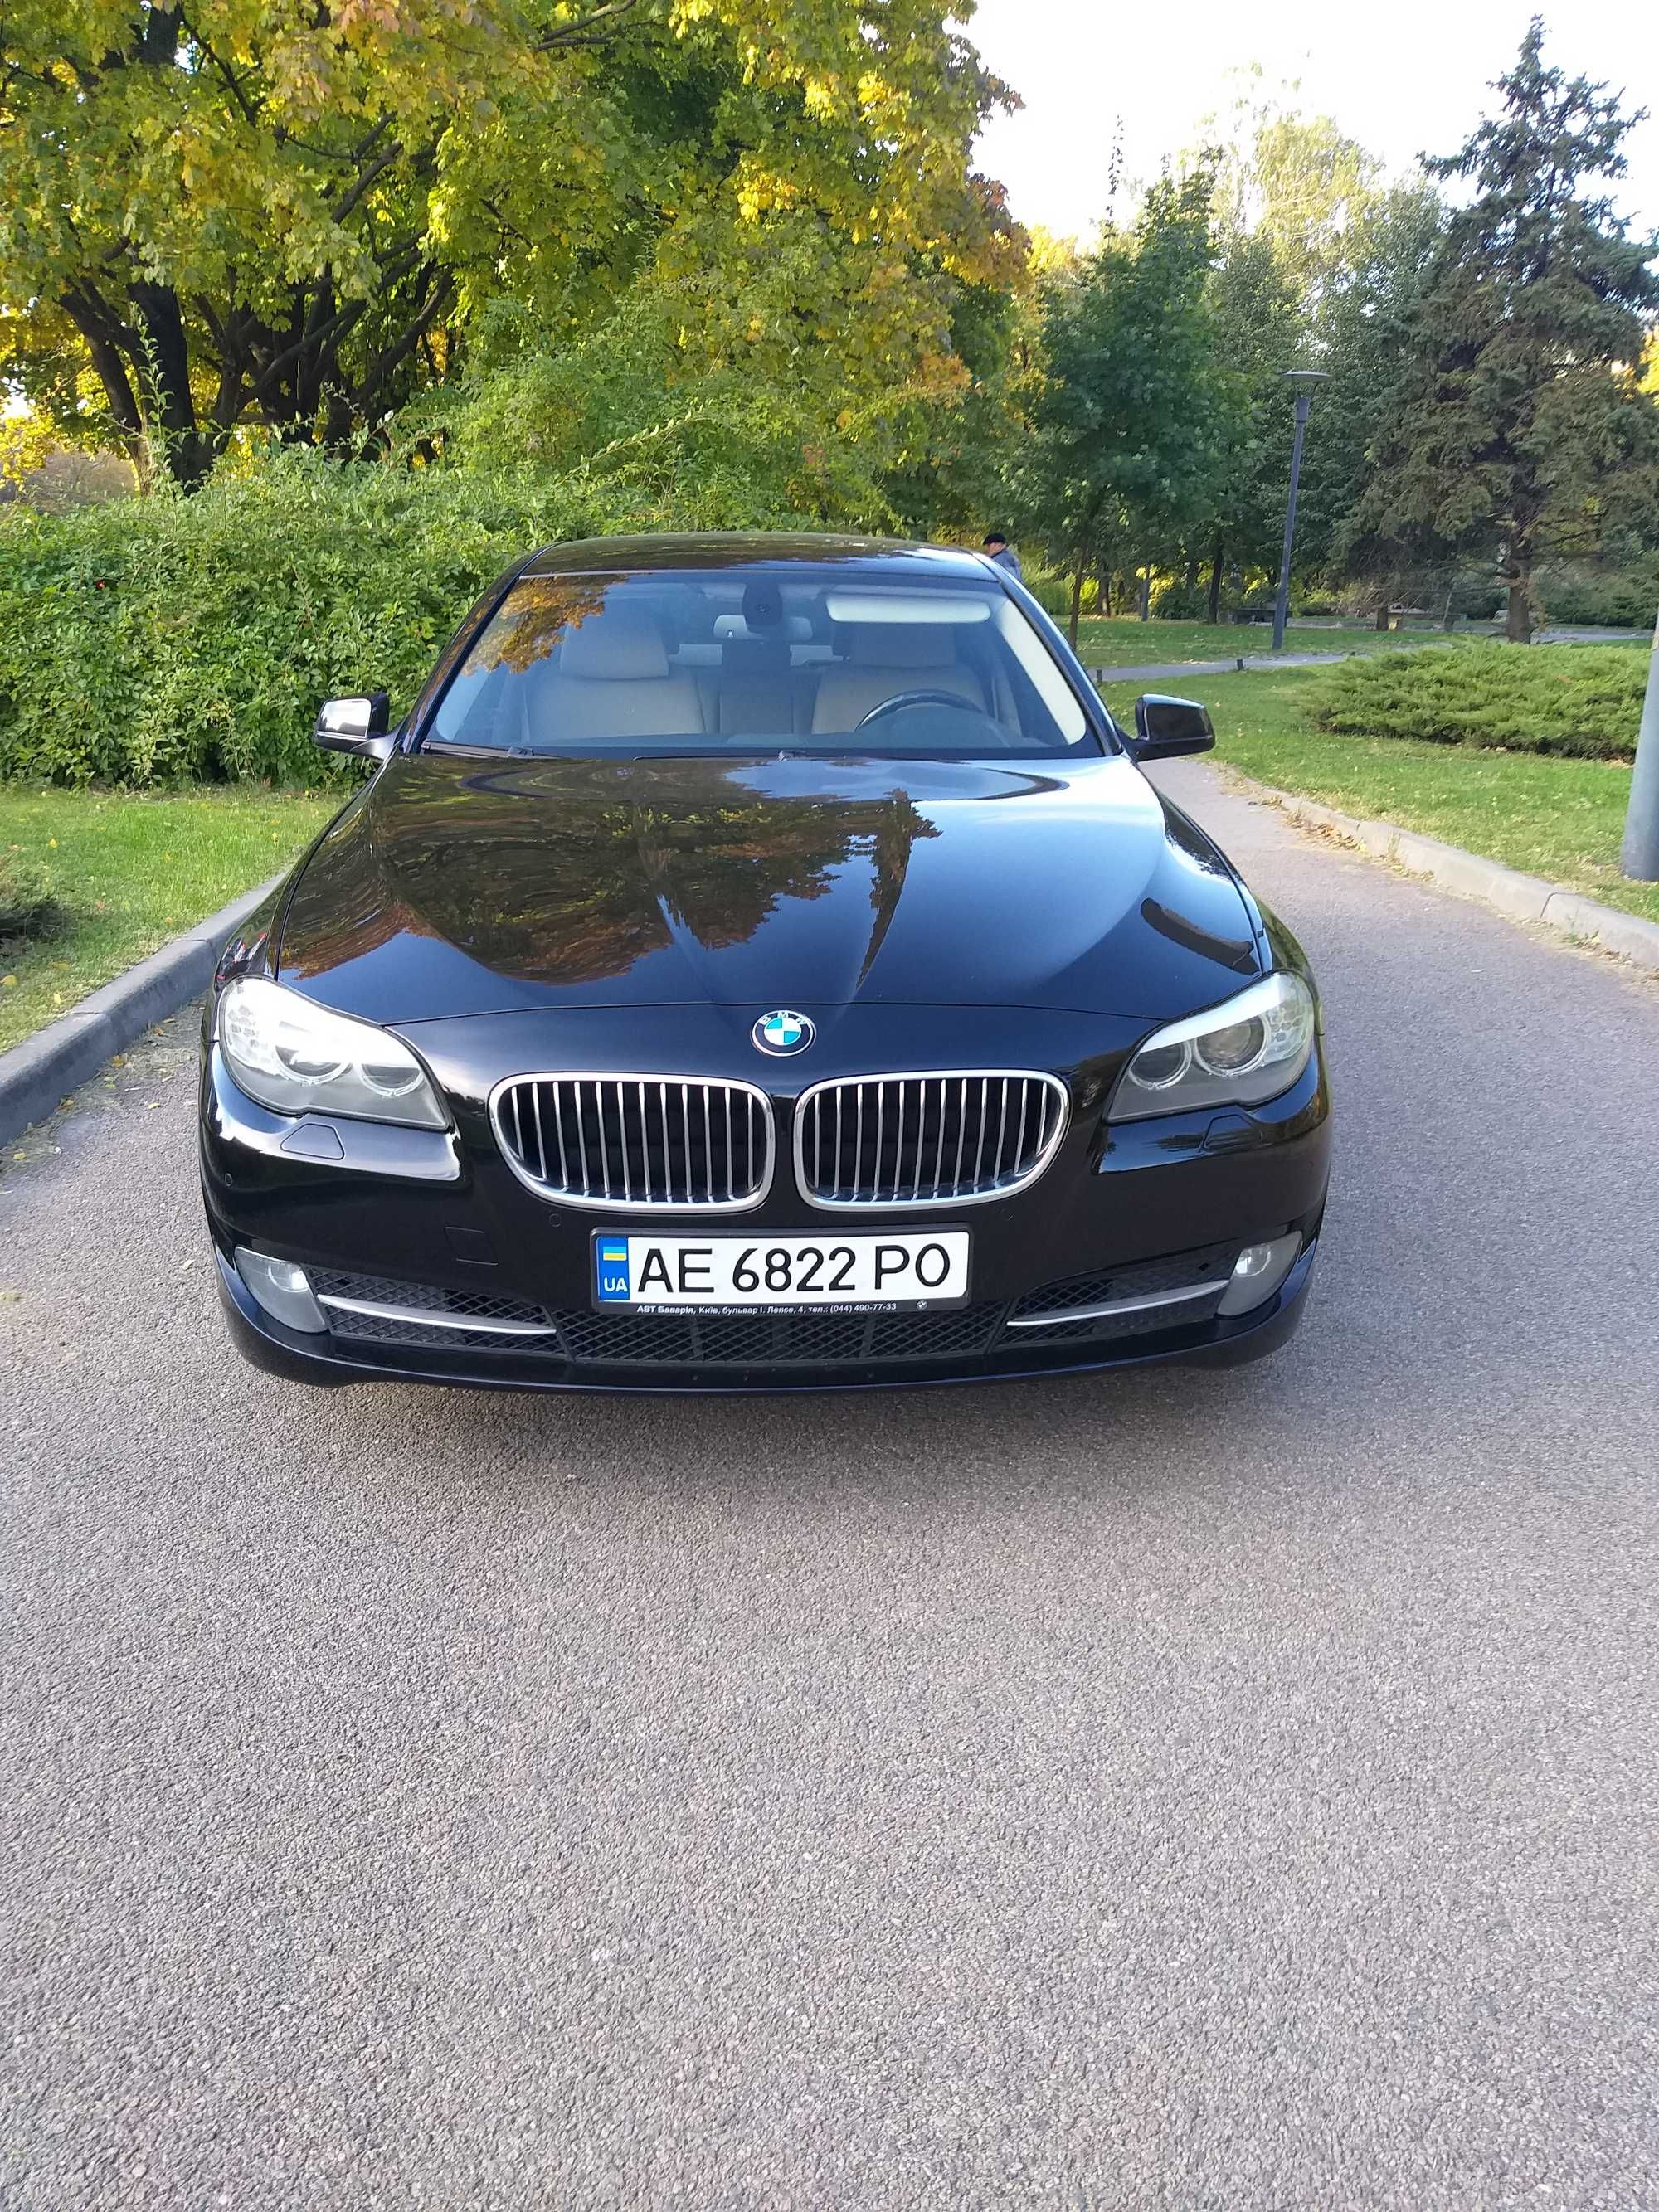 BMW 530d xdrive official